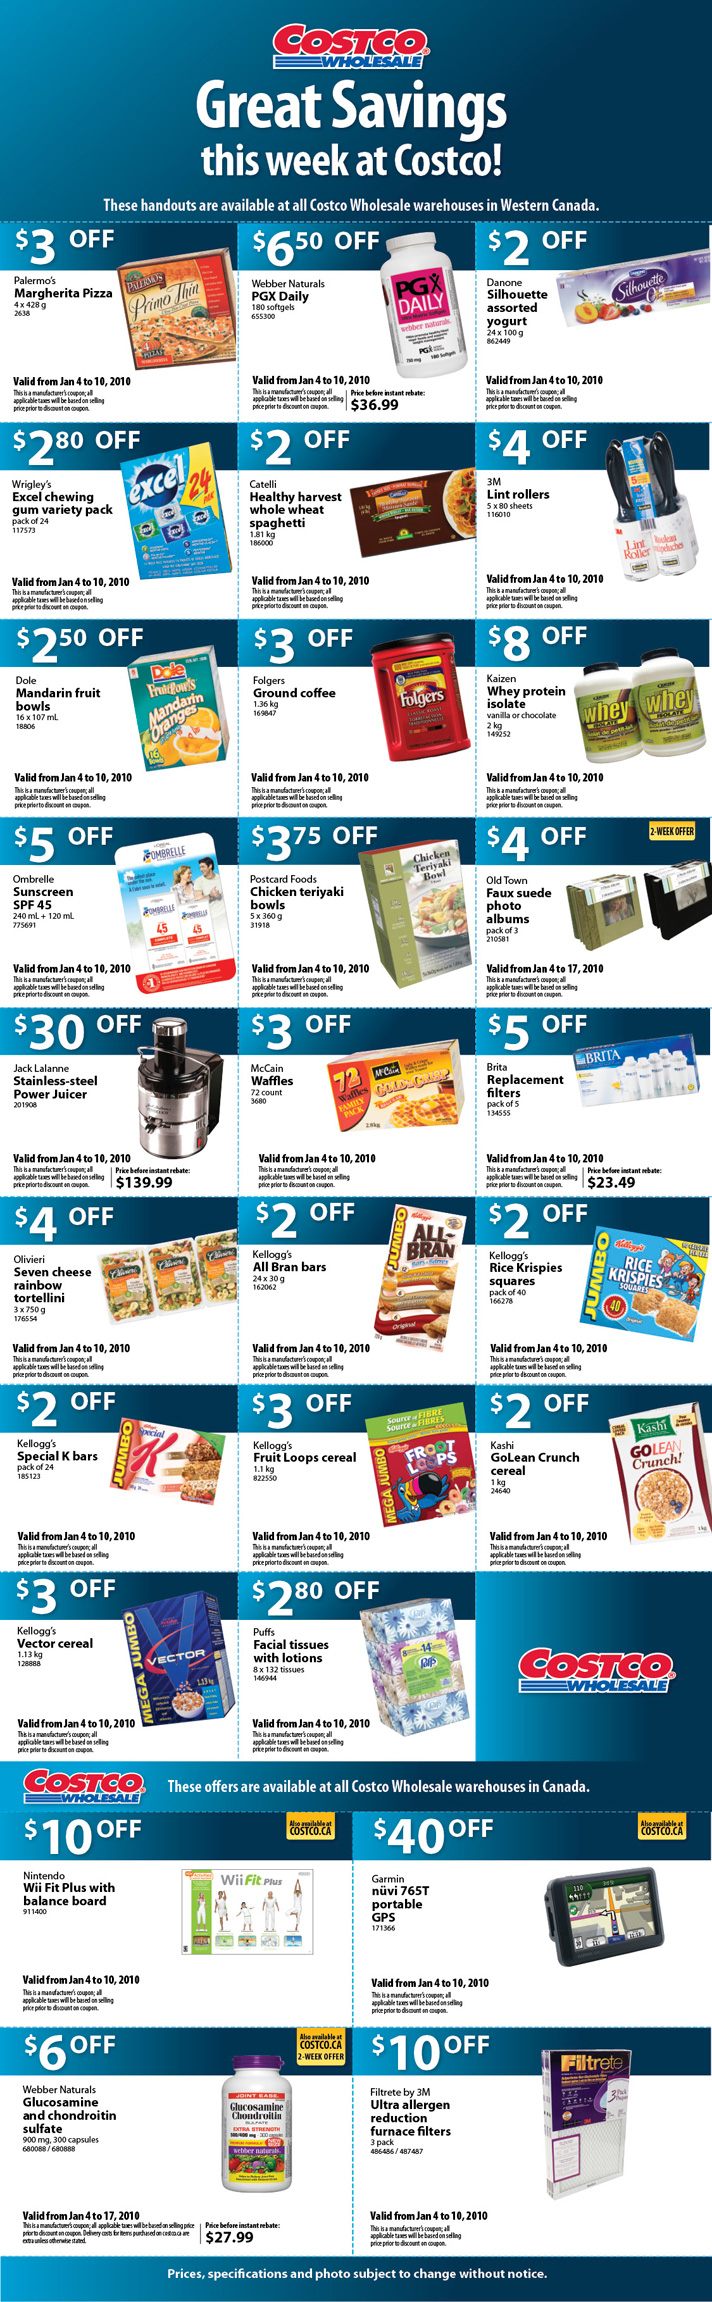 Canadian Coupons This Week's Costco Instant Savings Coupons Canadian